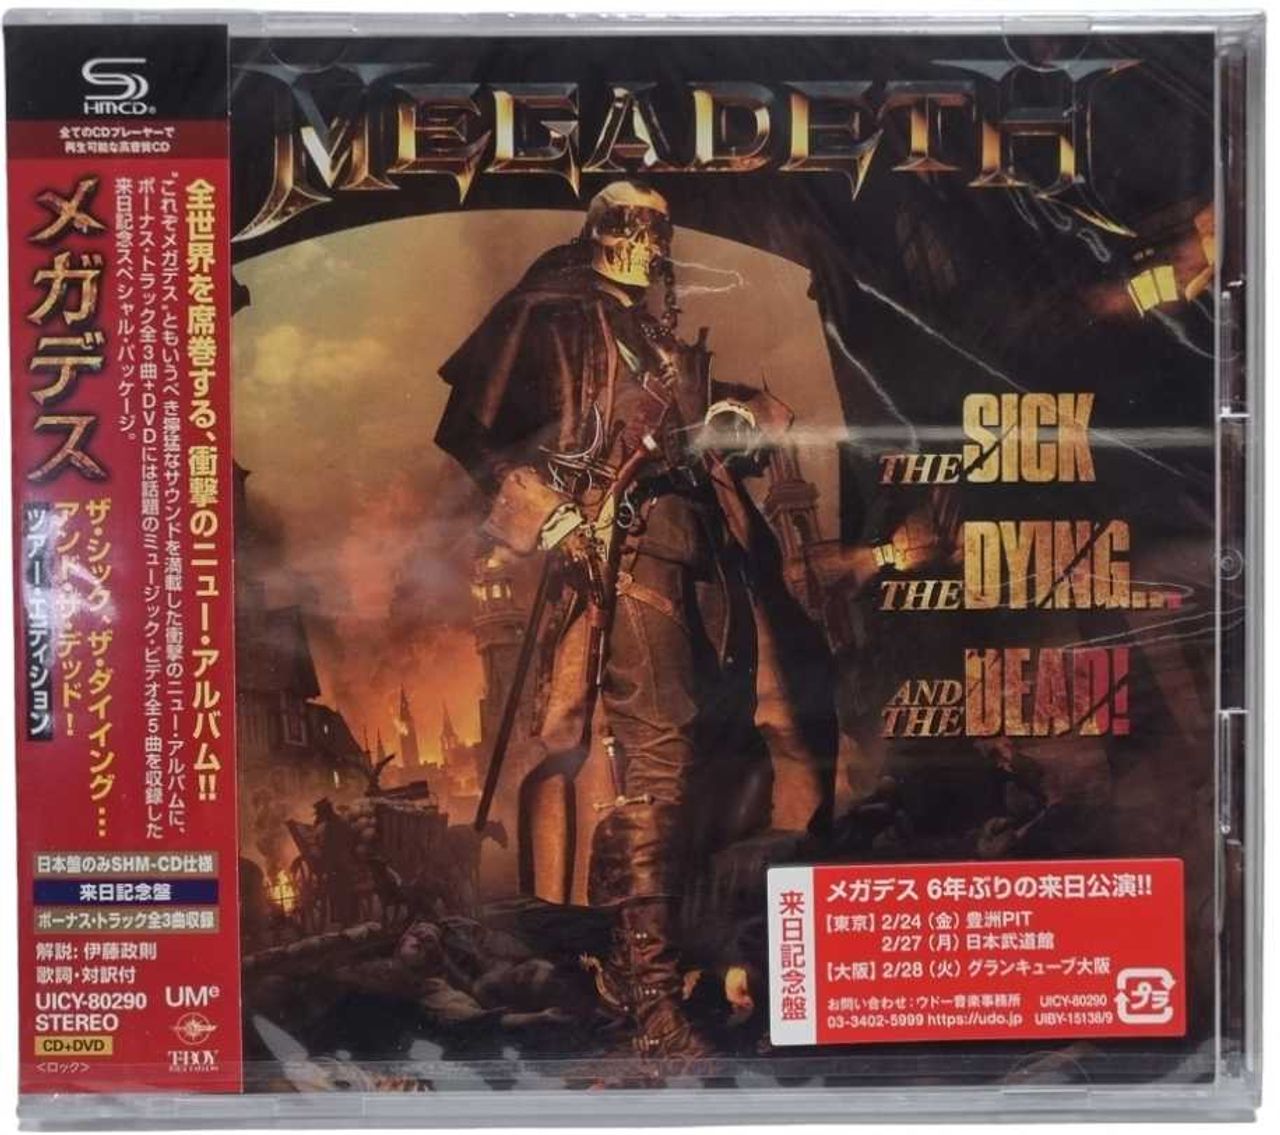 Megadeth The Sick, The Dying And The Dead! + Poster Japanese 2-disc  CD/DVD set